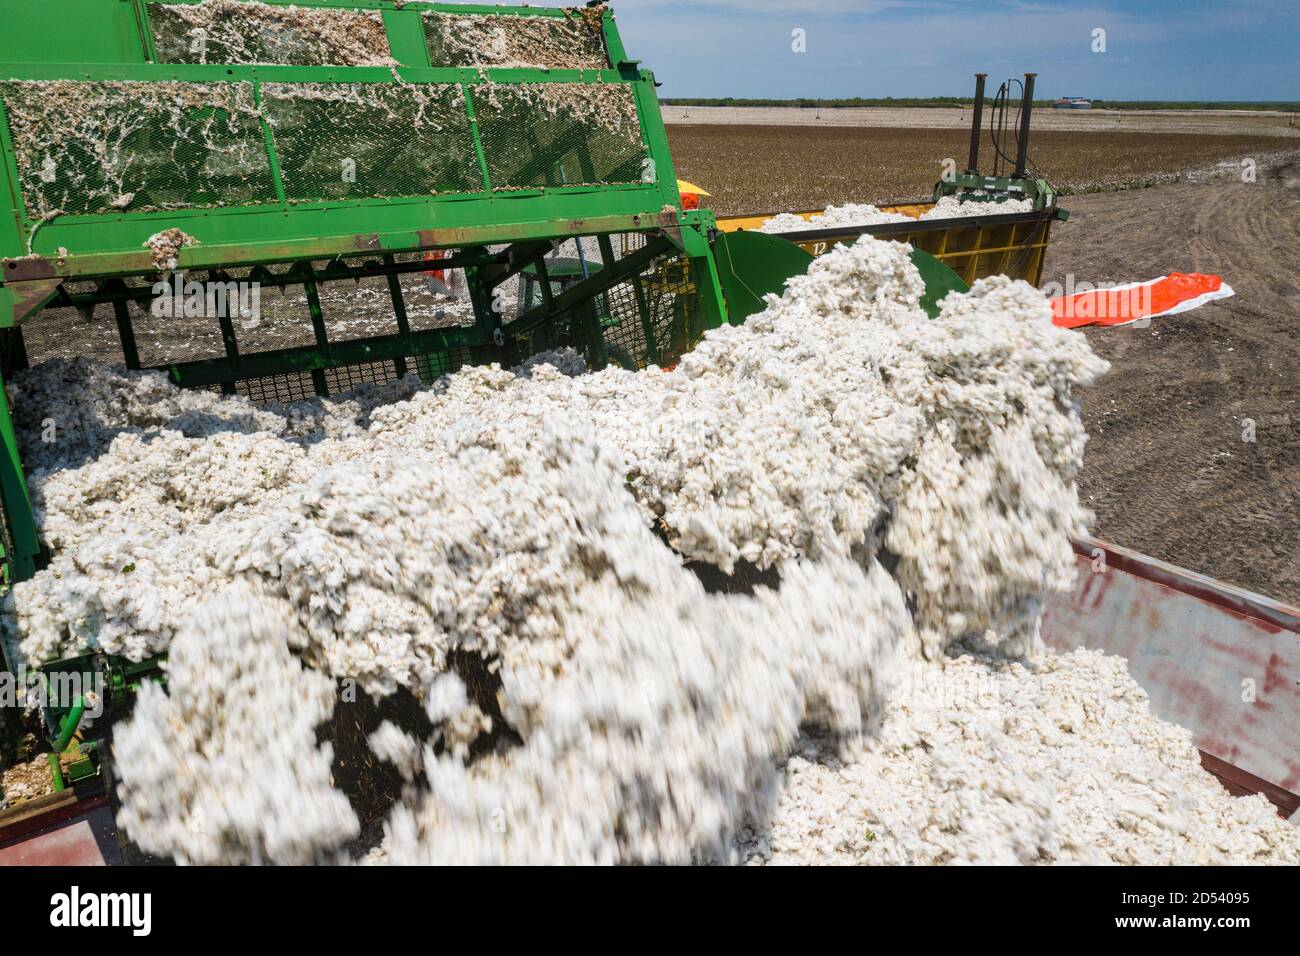 A speciality harvester unloads cotton bolls into a cotton module builders at his the Schirmer Farm during the cotton harvest August 22, 2020 in Batesville, Texas. Stock Photo